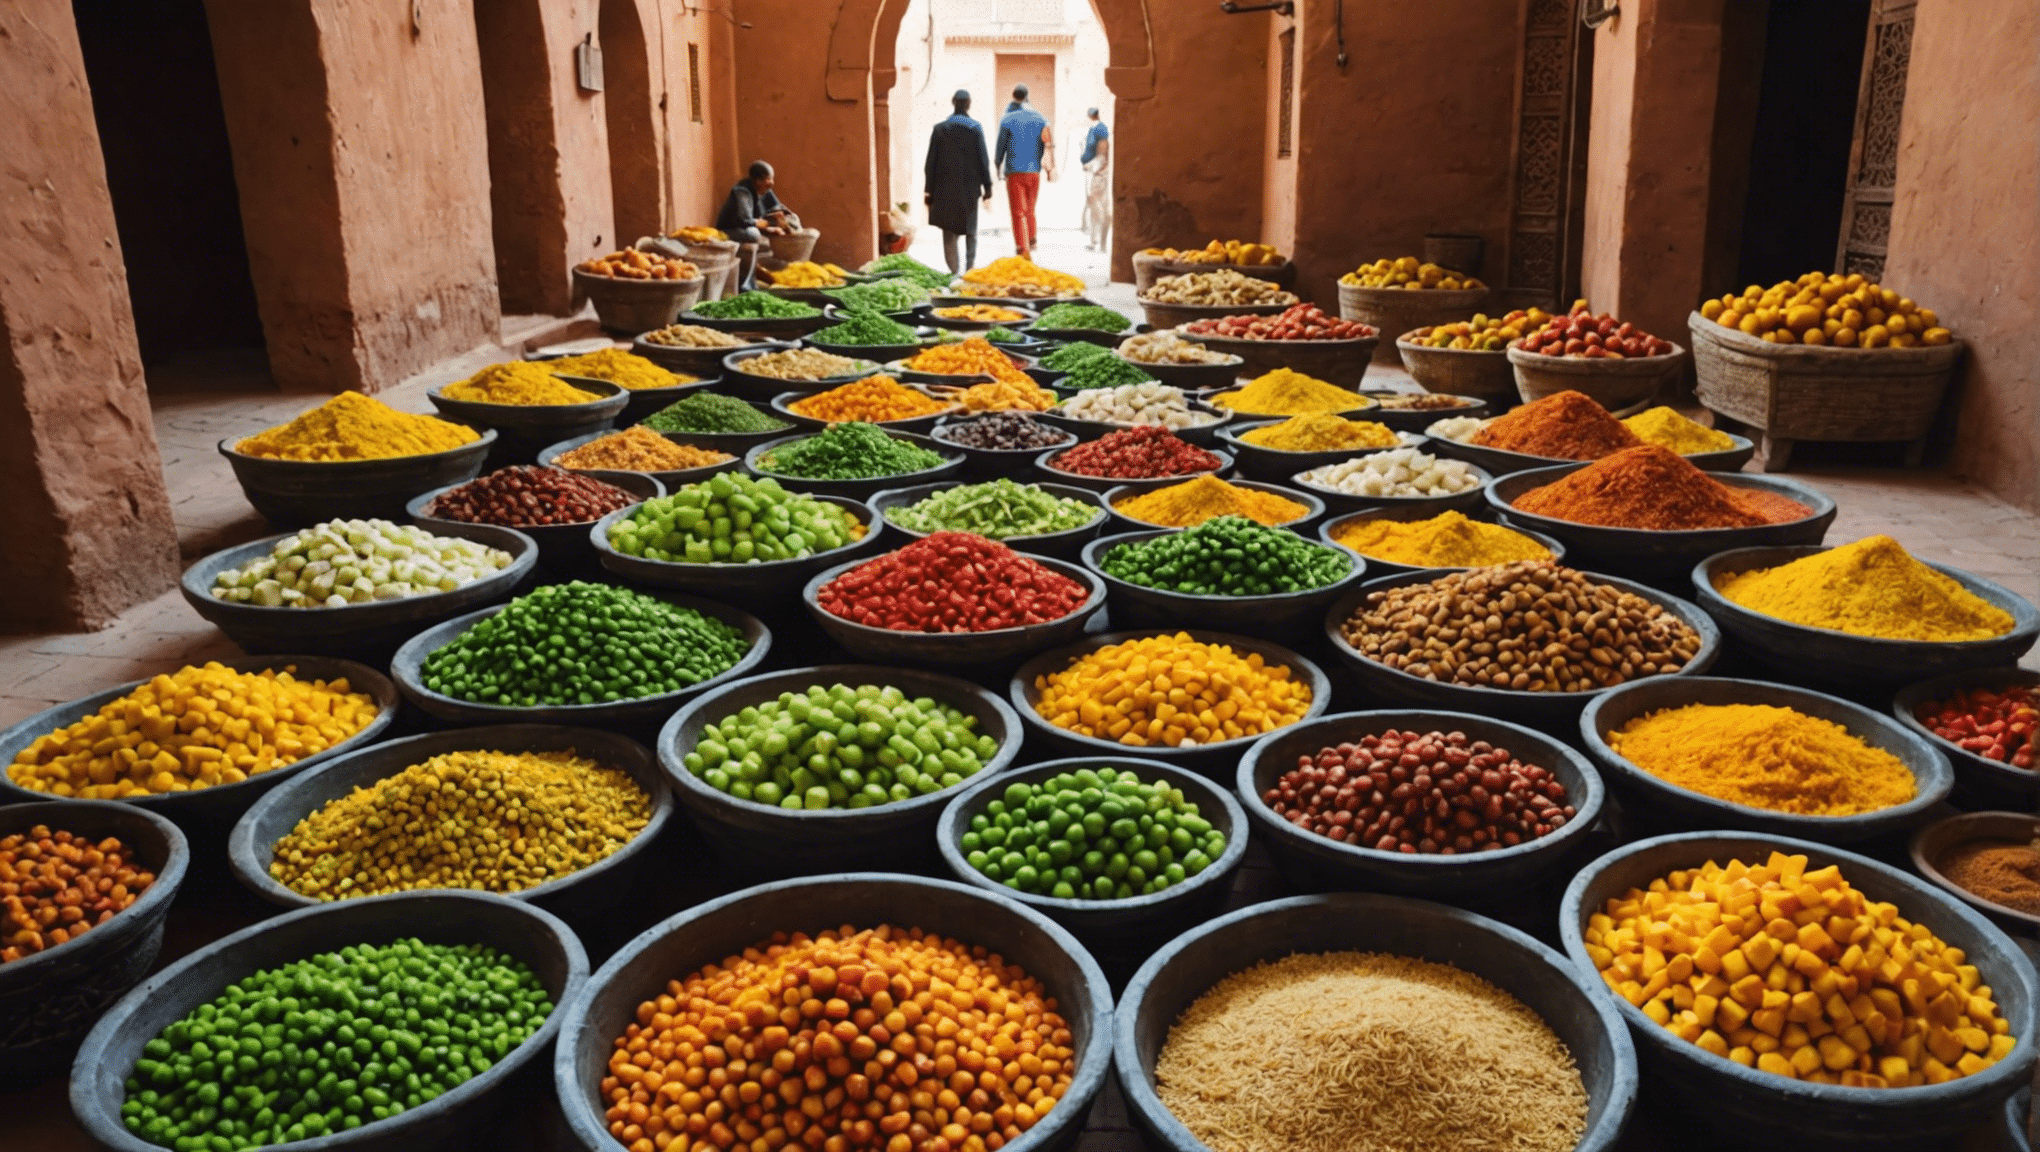 discover the availability of vegetarian food in marrakech and find out where to enjoy delicious meat-free meals during your visit to this vibrant city.